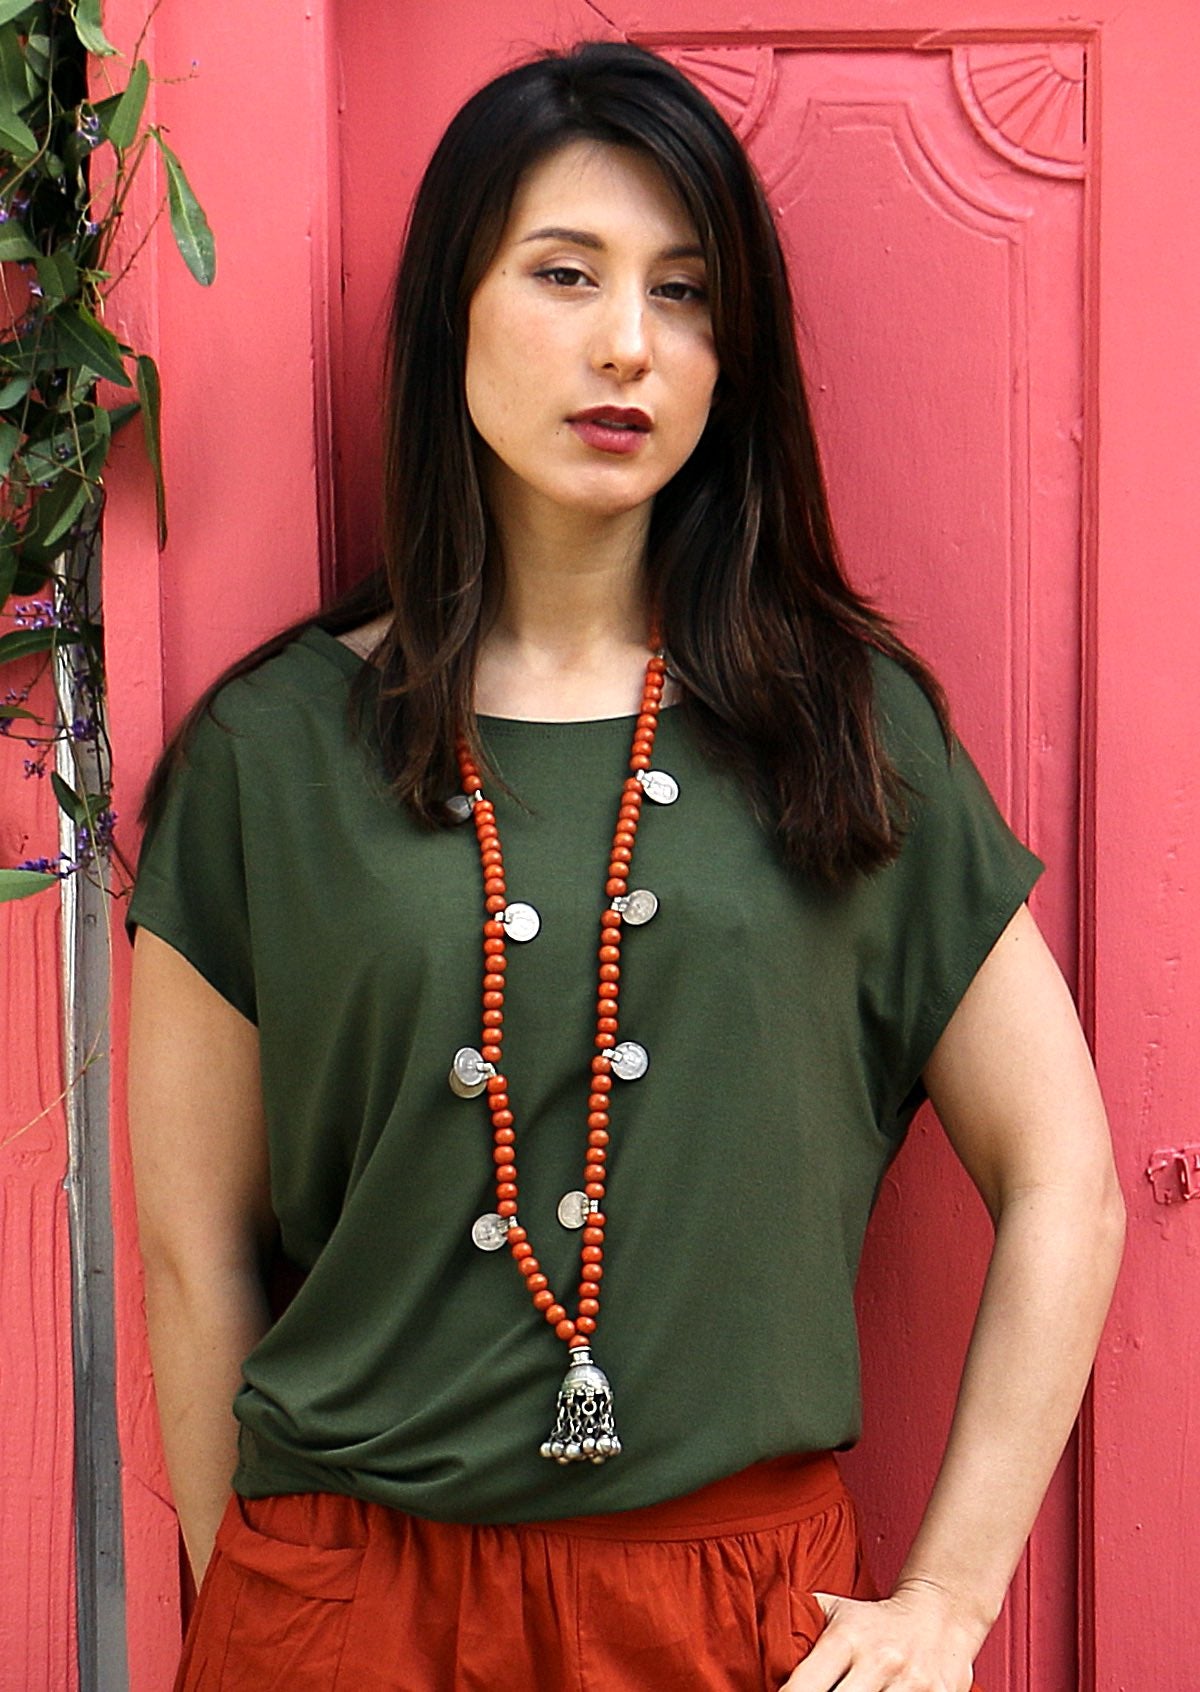 Woman wearing olive green rayon top with orange pants and necklace